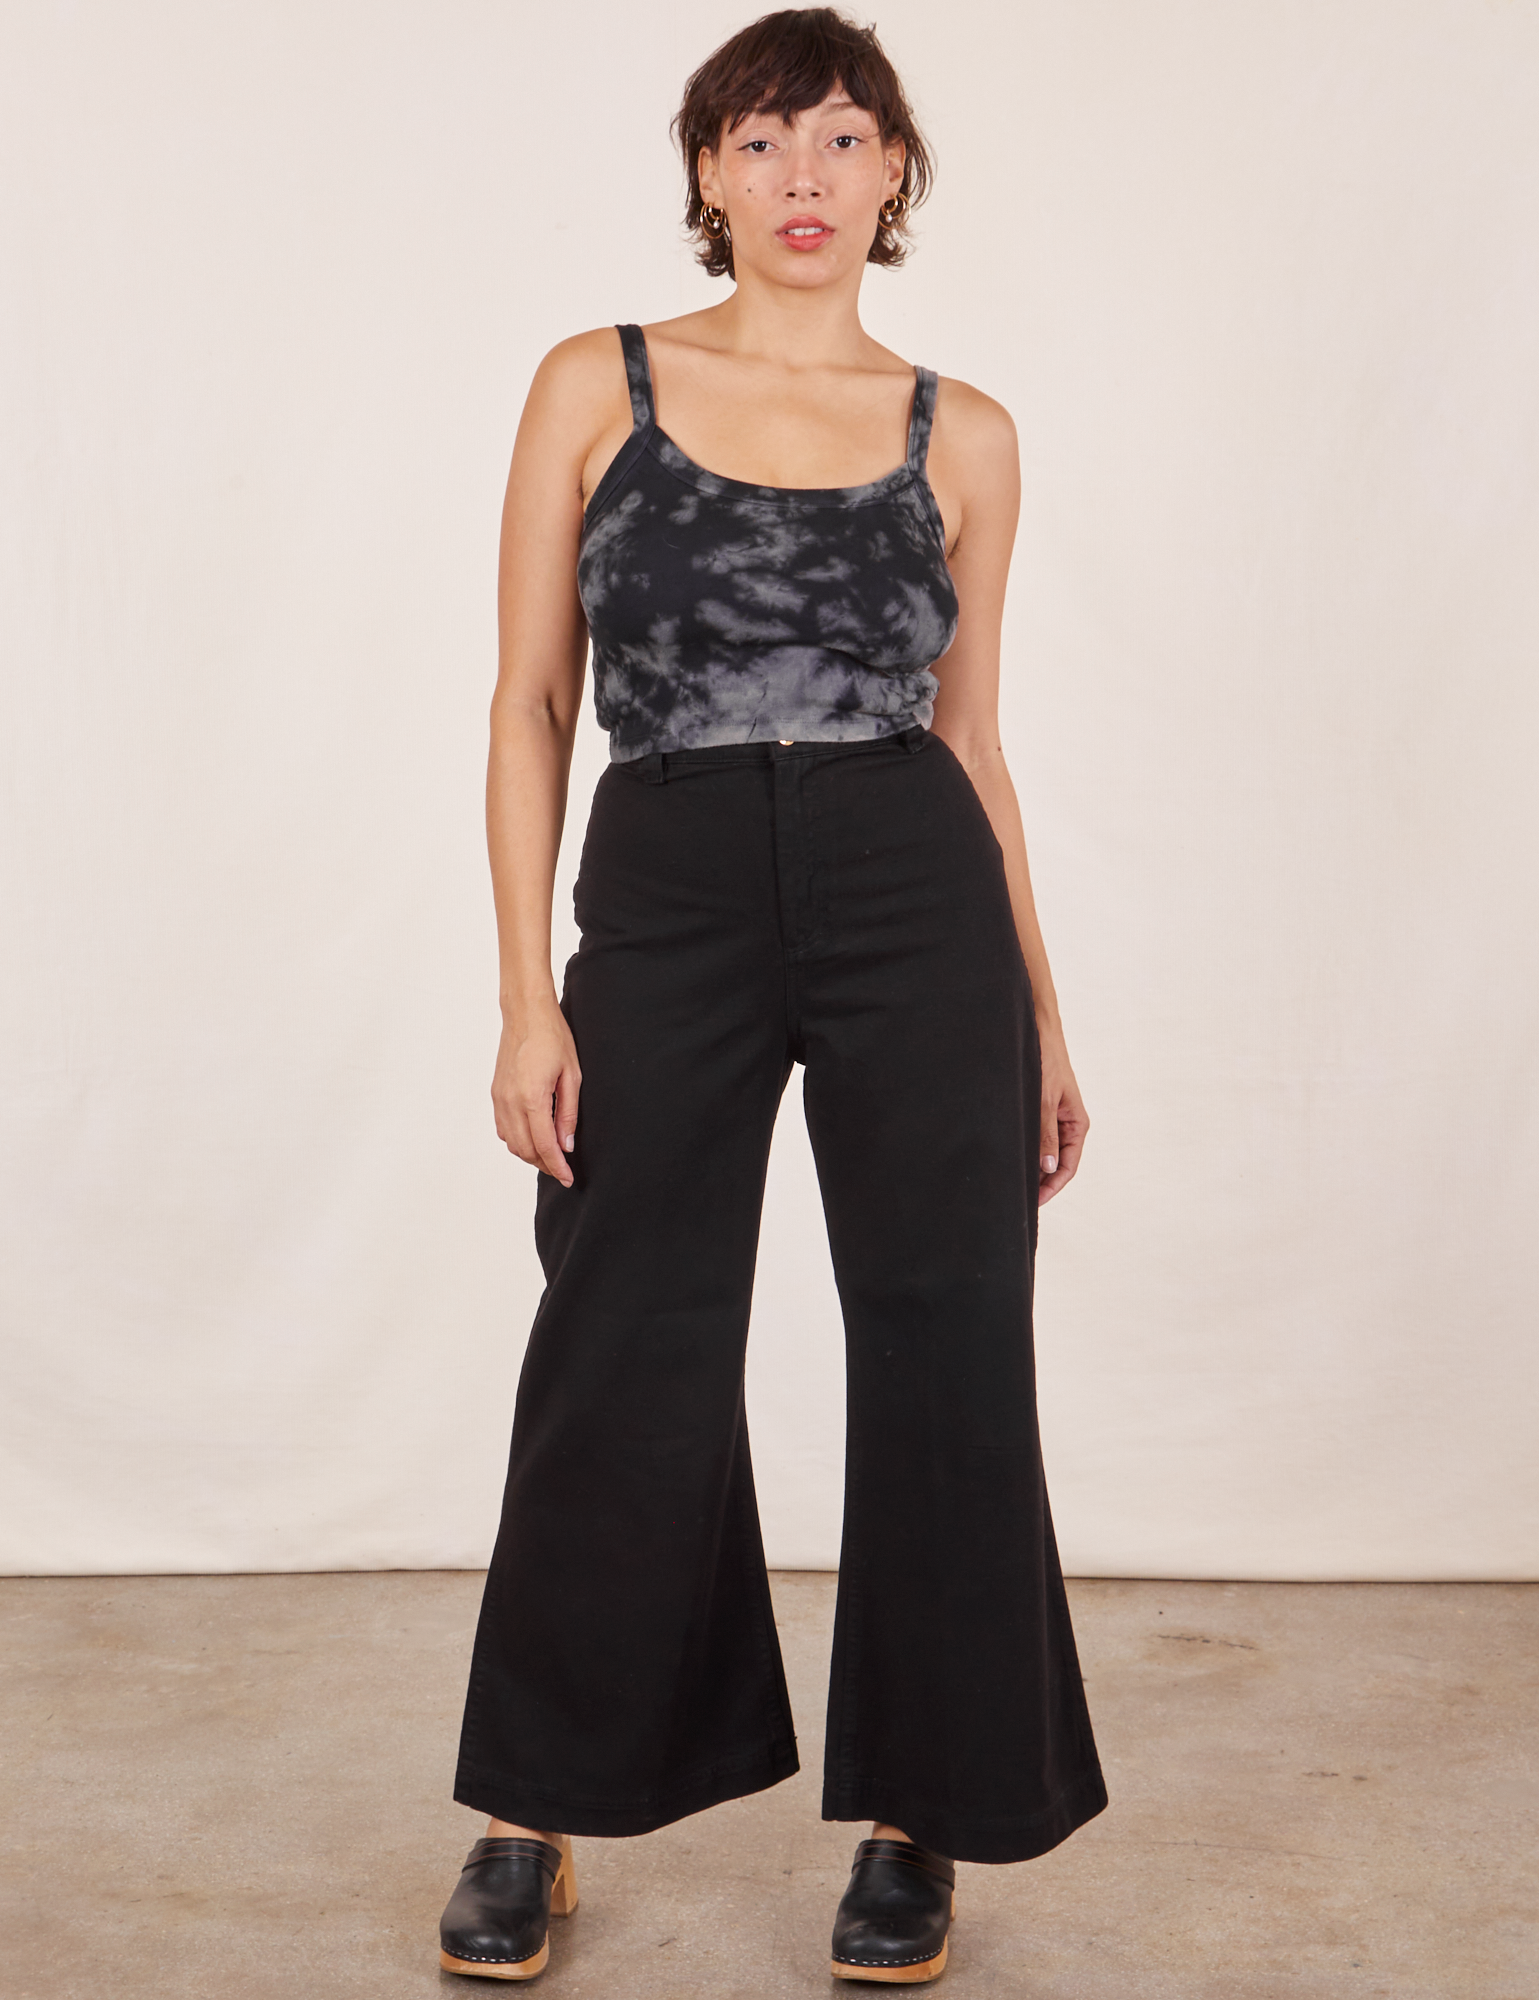 Tiara is wearing Cropped Cami in Black Magic Waters and black Bell Bottoms